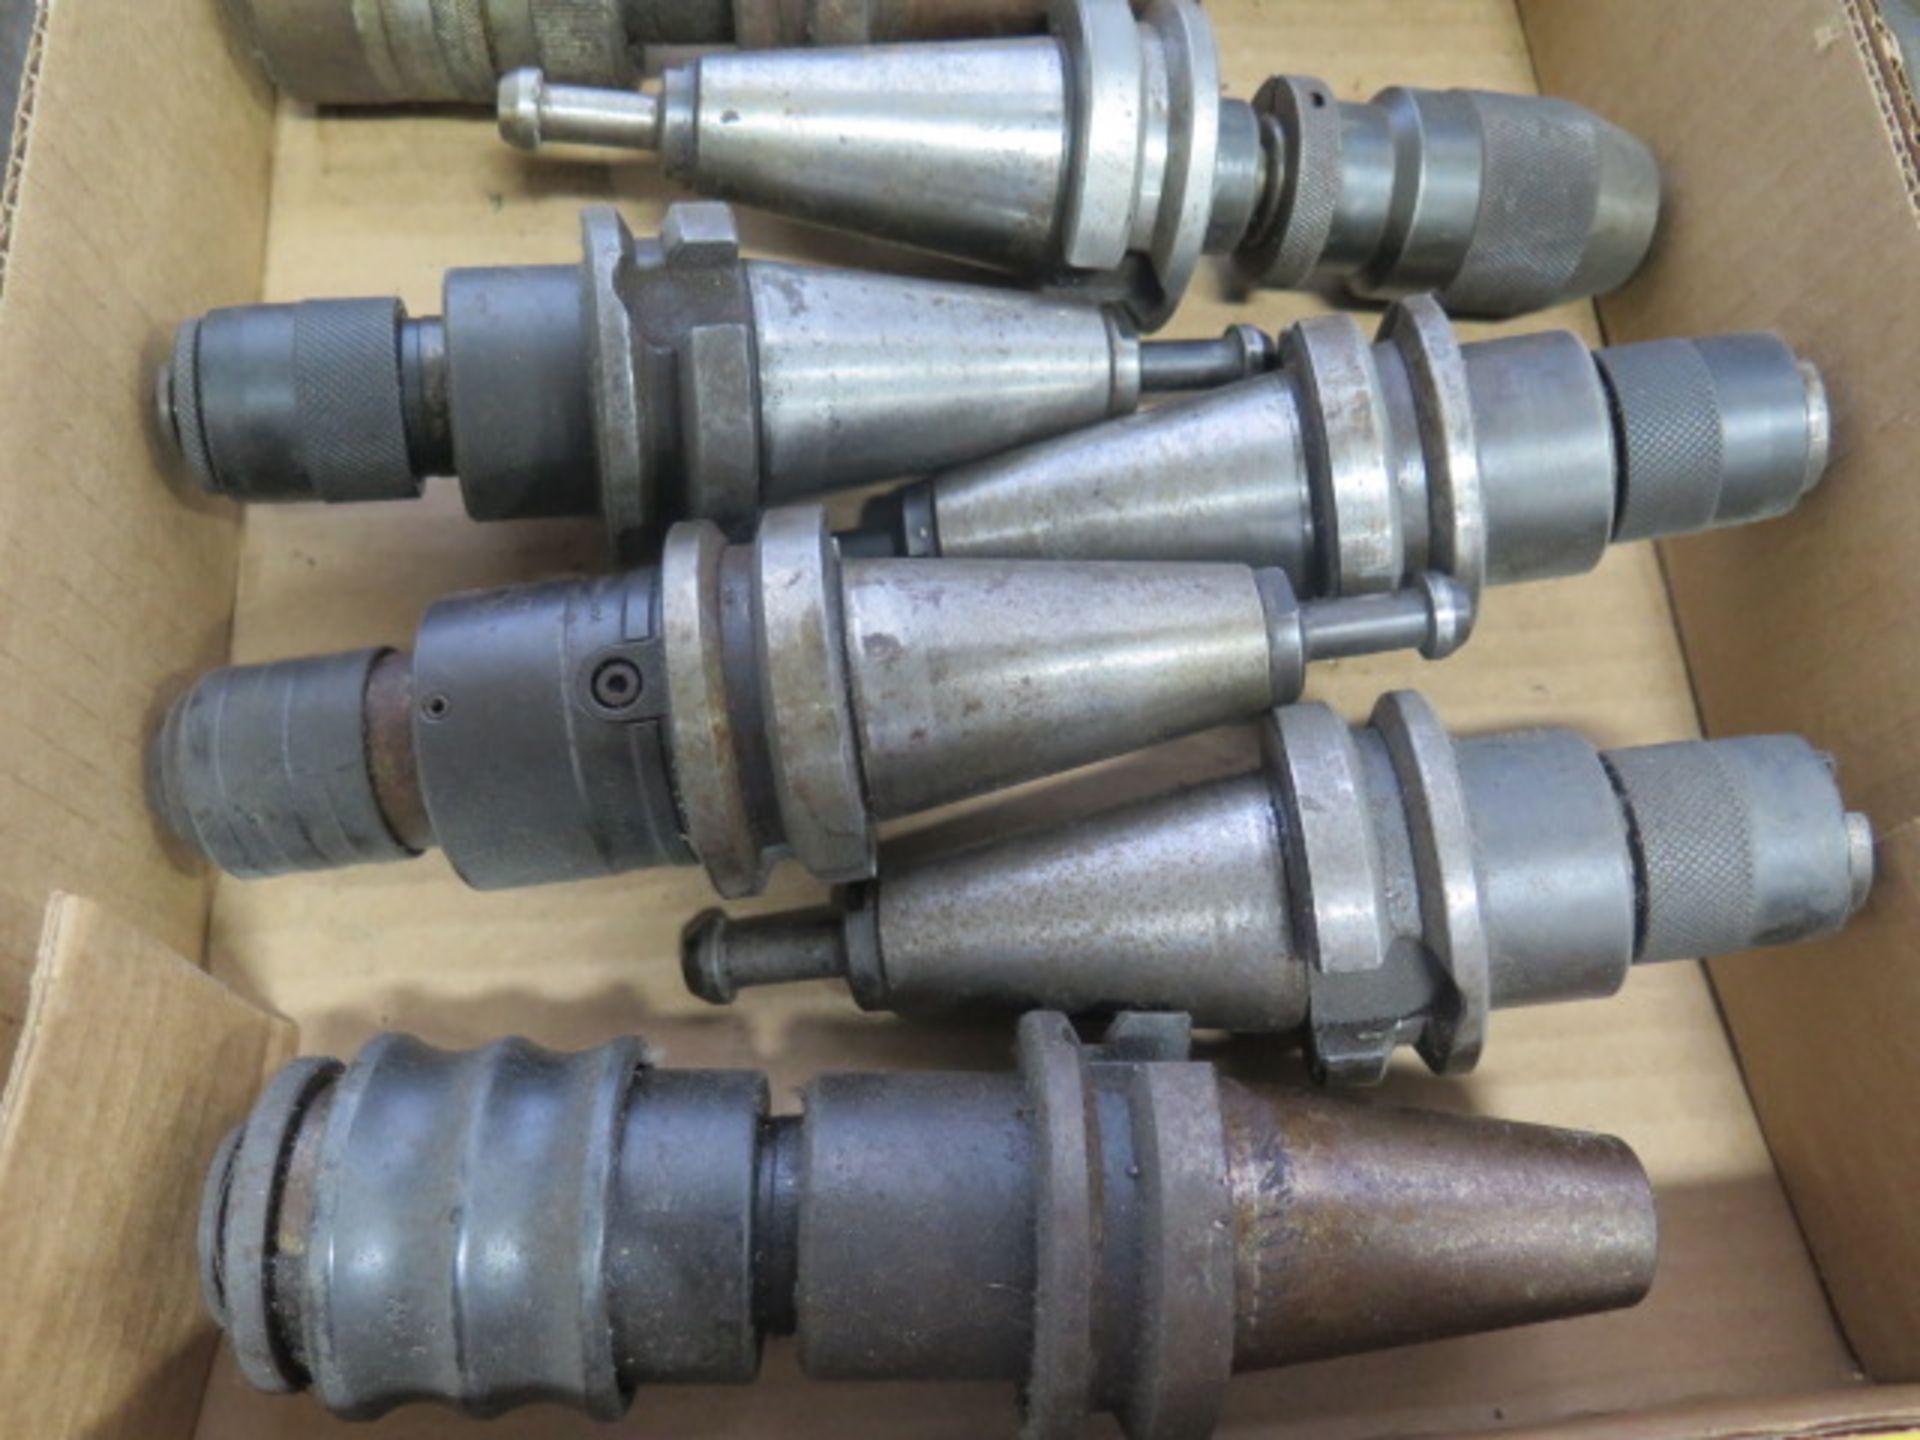 BT-40 Taper Tapping Heads and Boring Heads (9) (SOLD AS-IS - NO WARRANTY) - Image 4 of 5